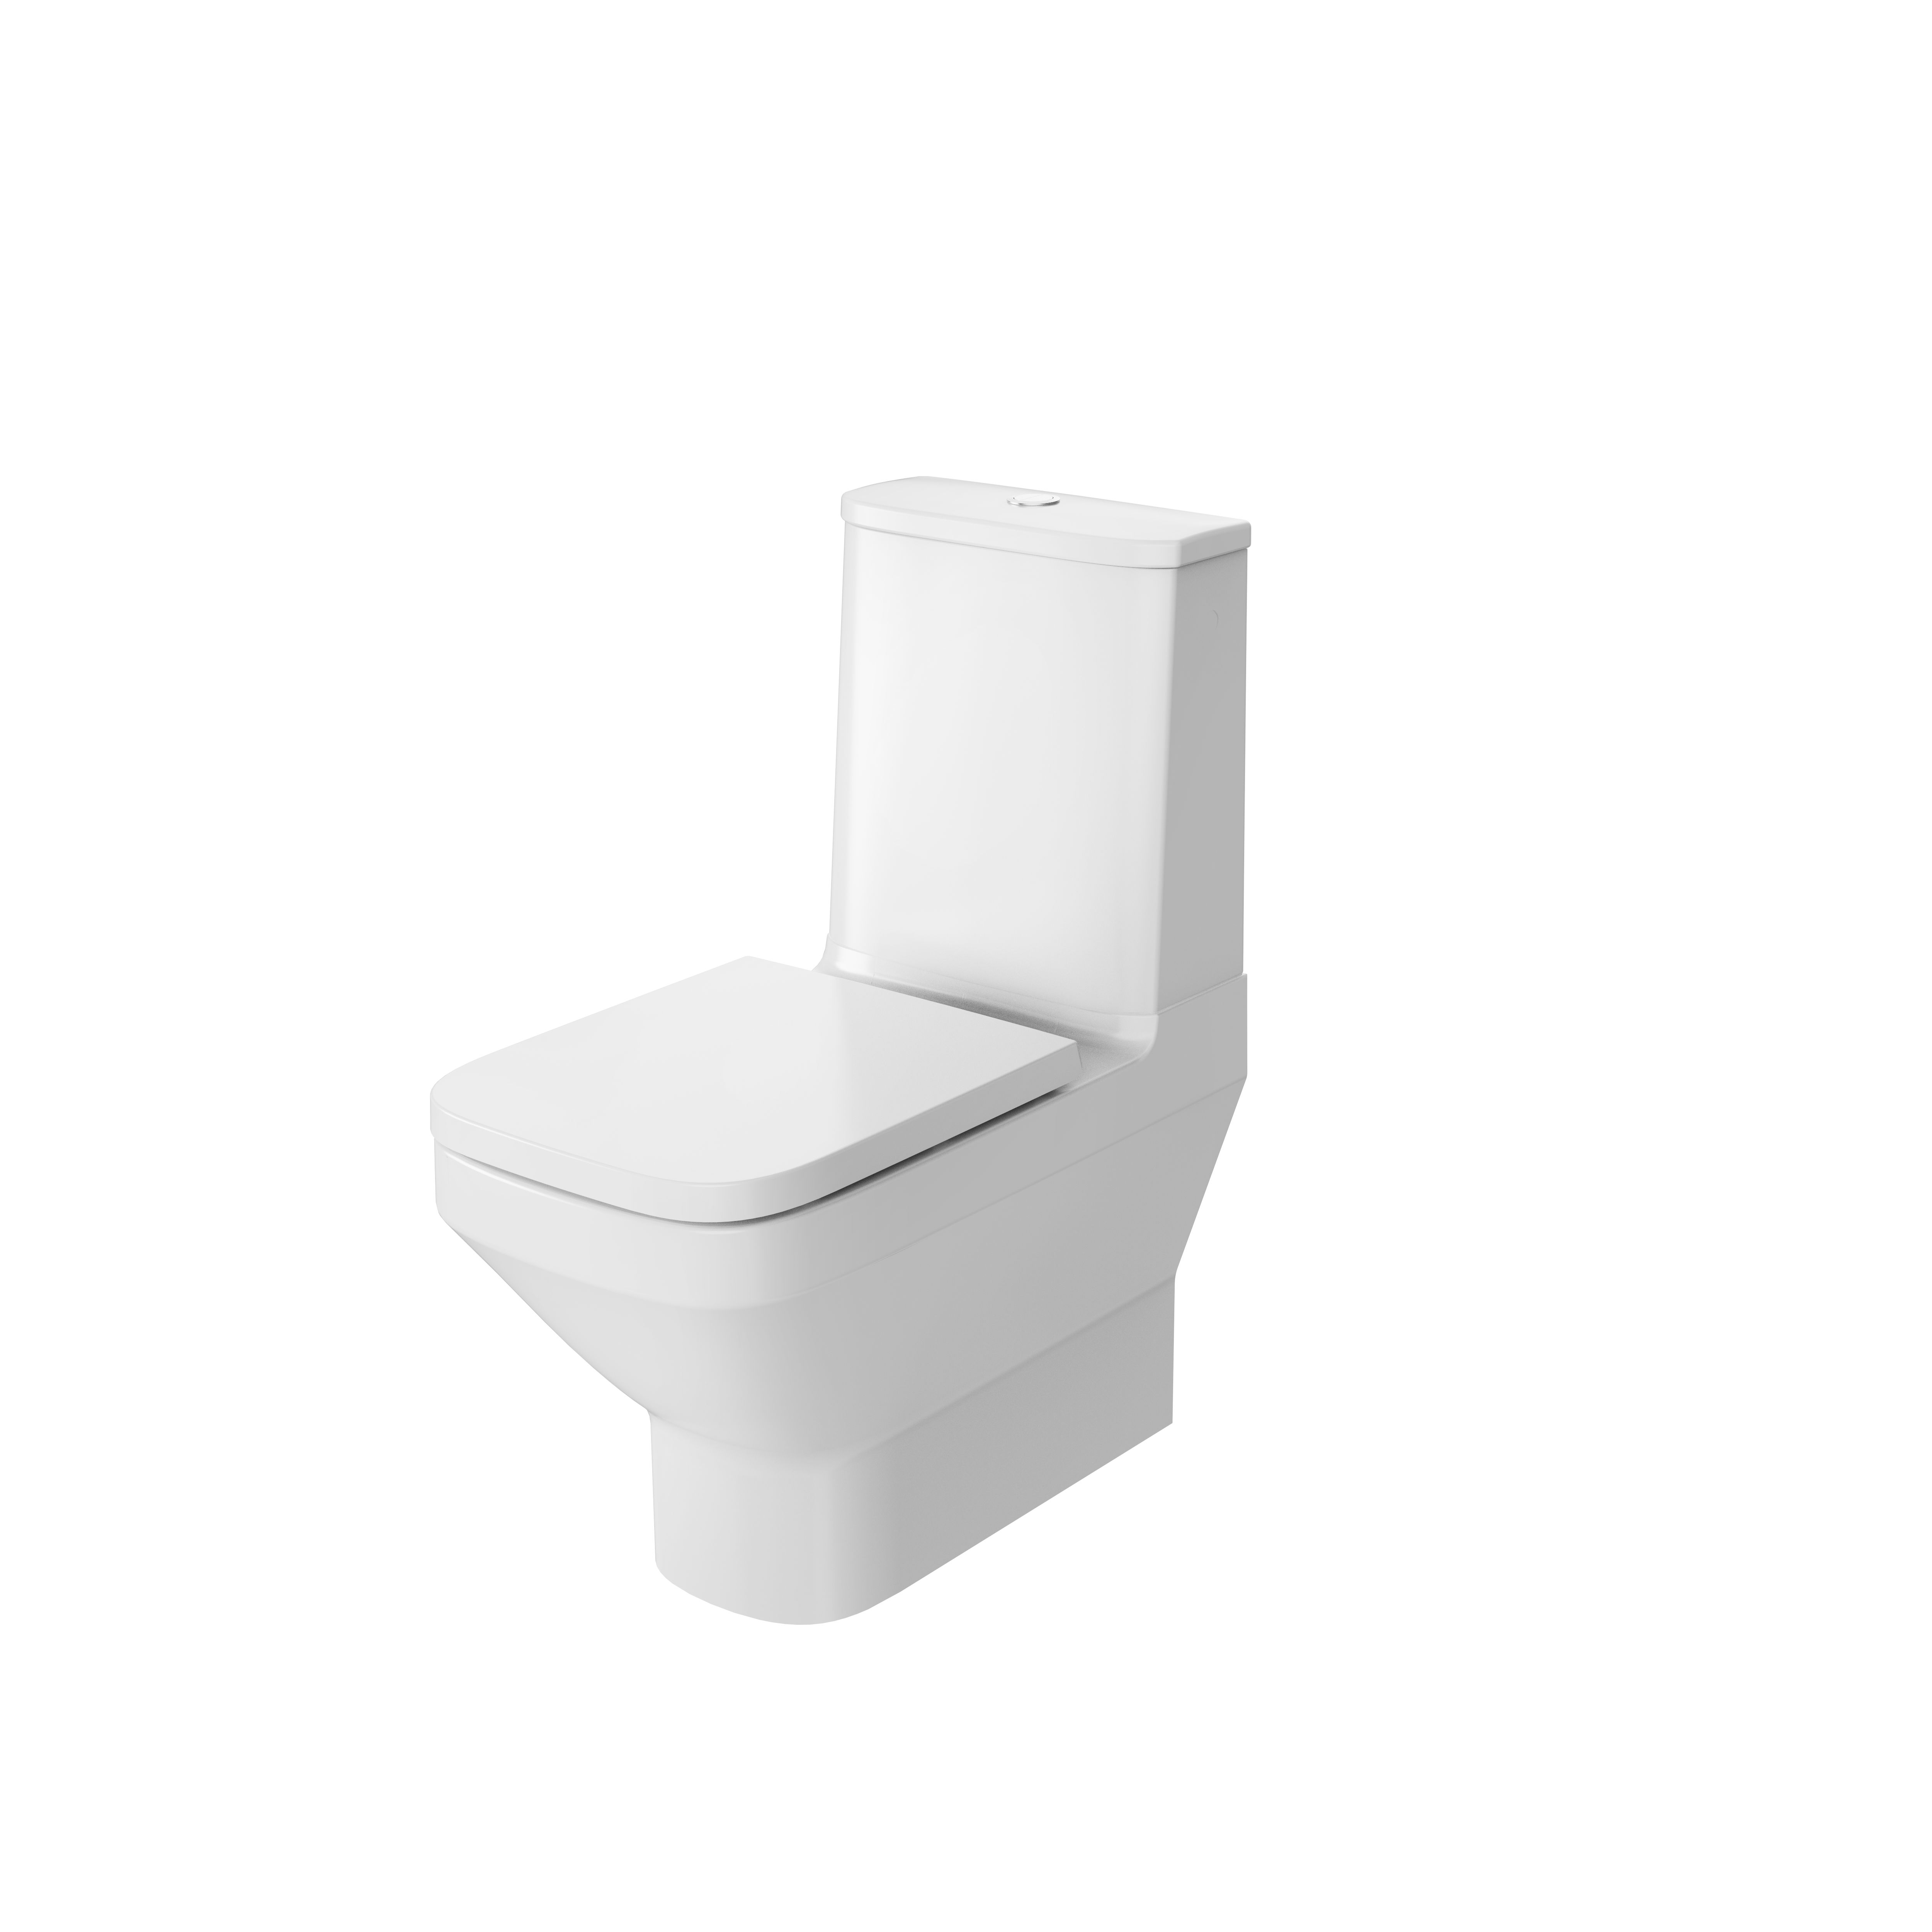 GoodHome Cavally White Close-coupled Comfort height Toilet set